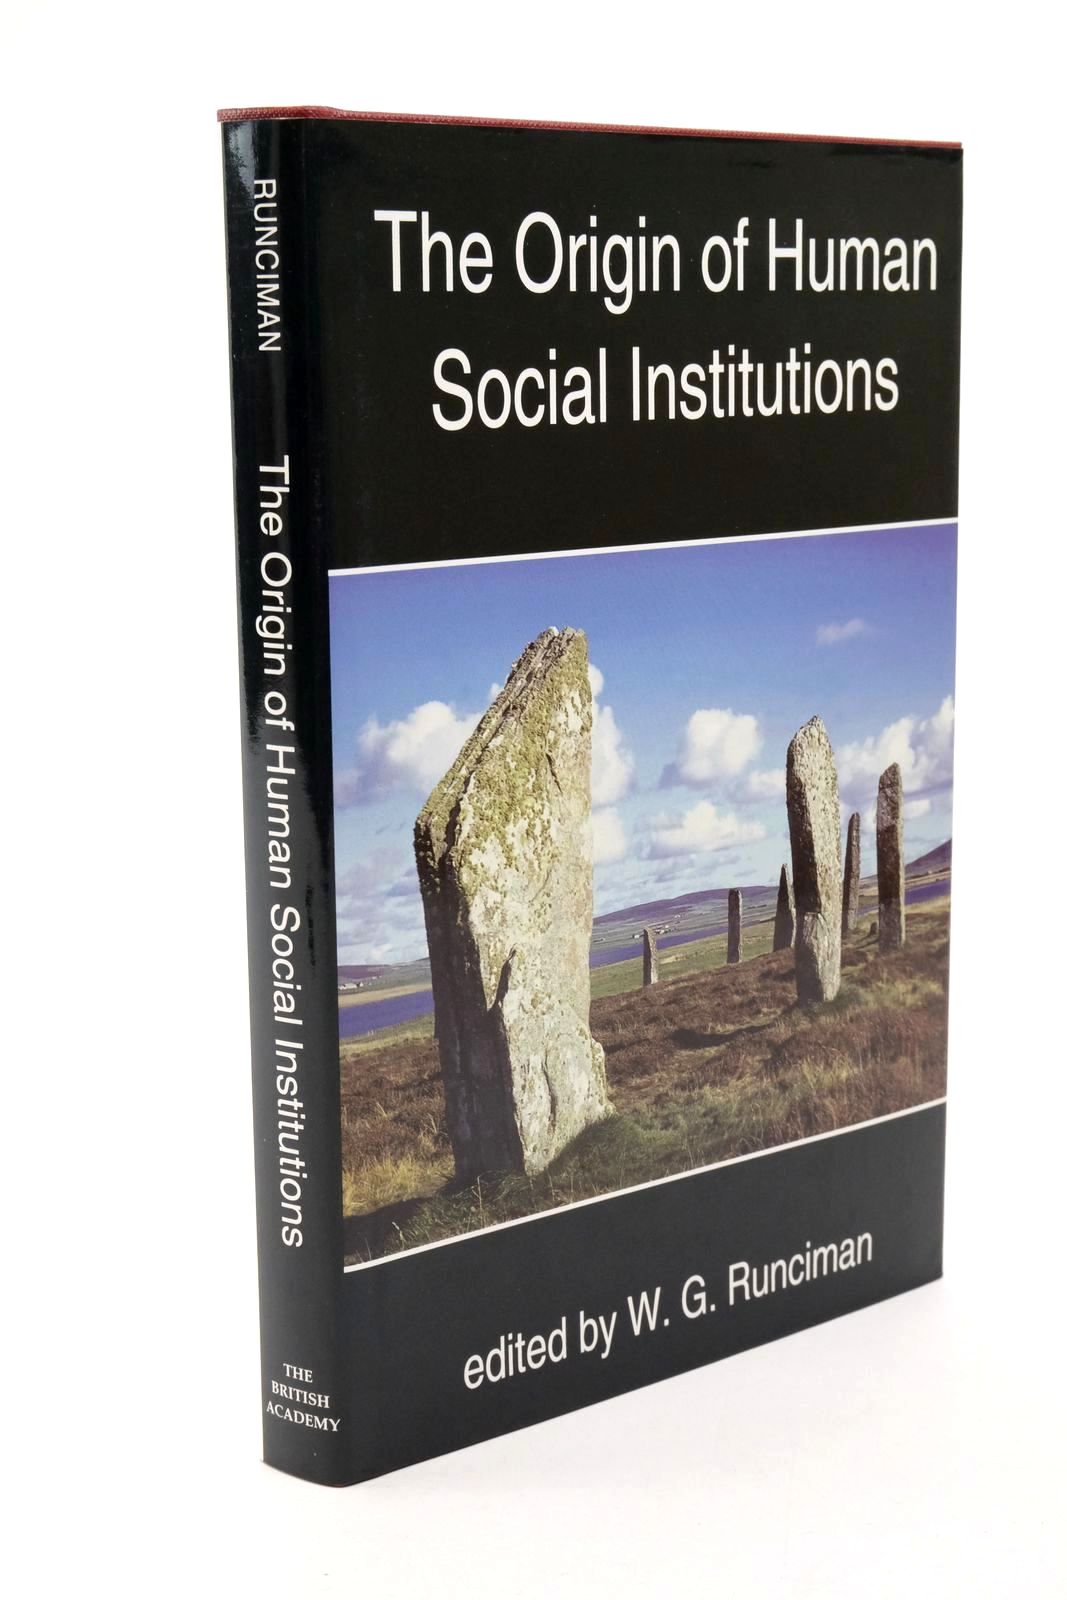 Photo of THE ORIGIN OF HUMAN SOCIAL INSTITUTIONS written by Runciman, W.G. published by Oxford University Press (STOCK CODE: 1322648)  for sale by Stella & Rose's Books